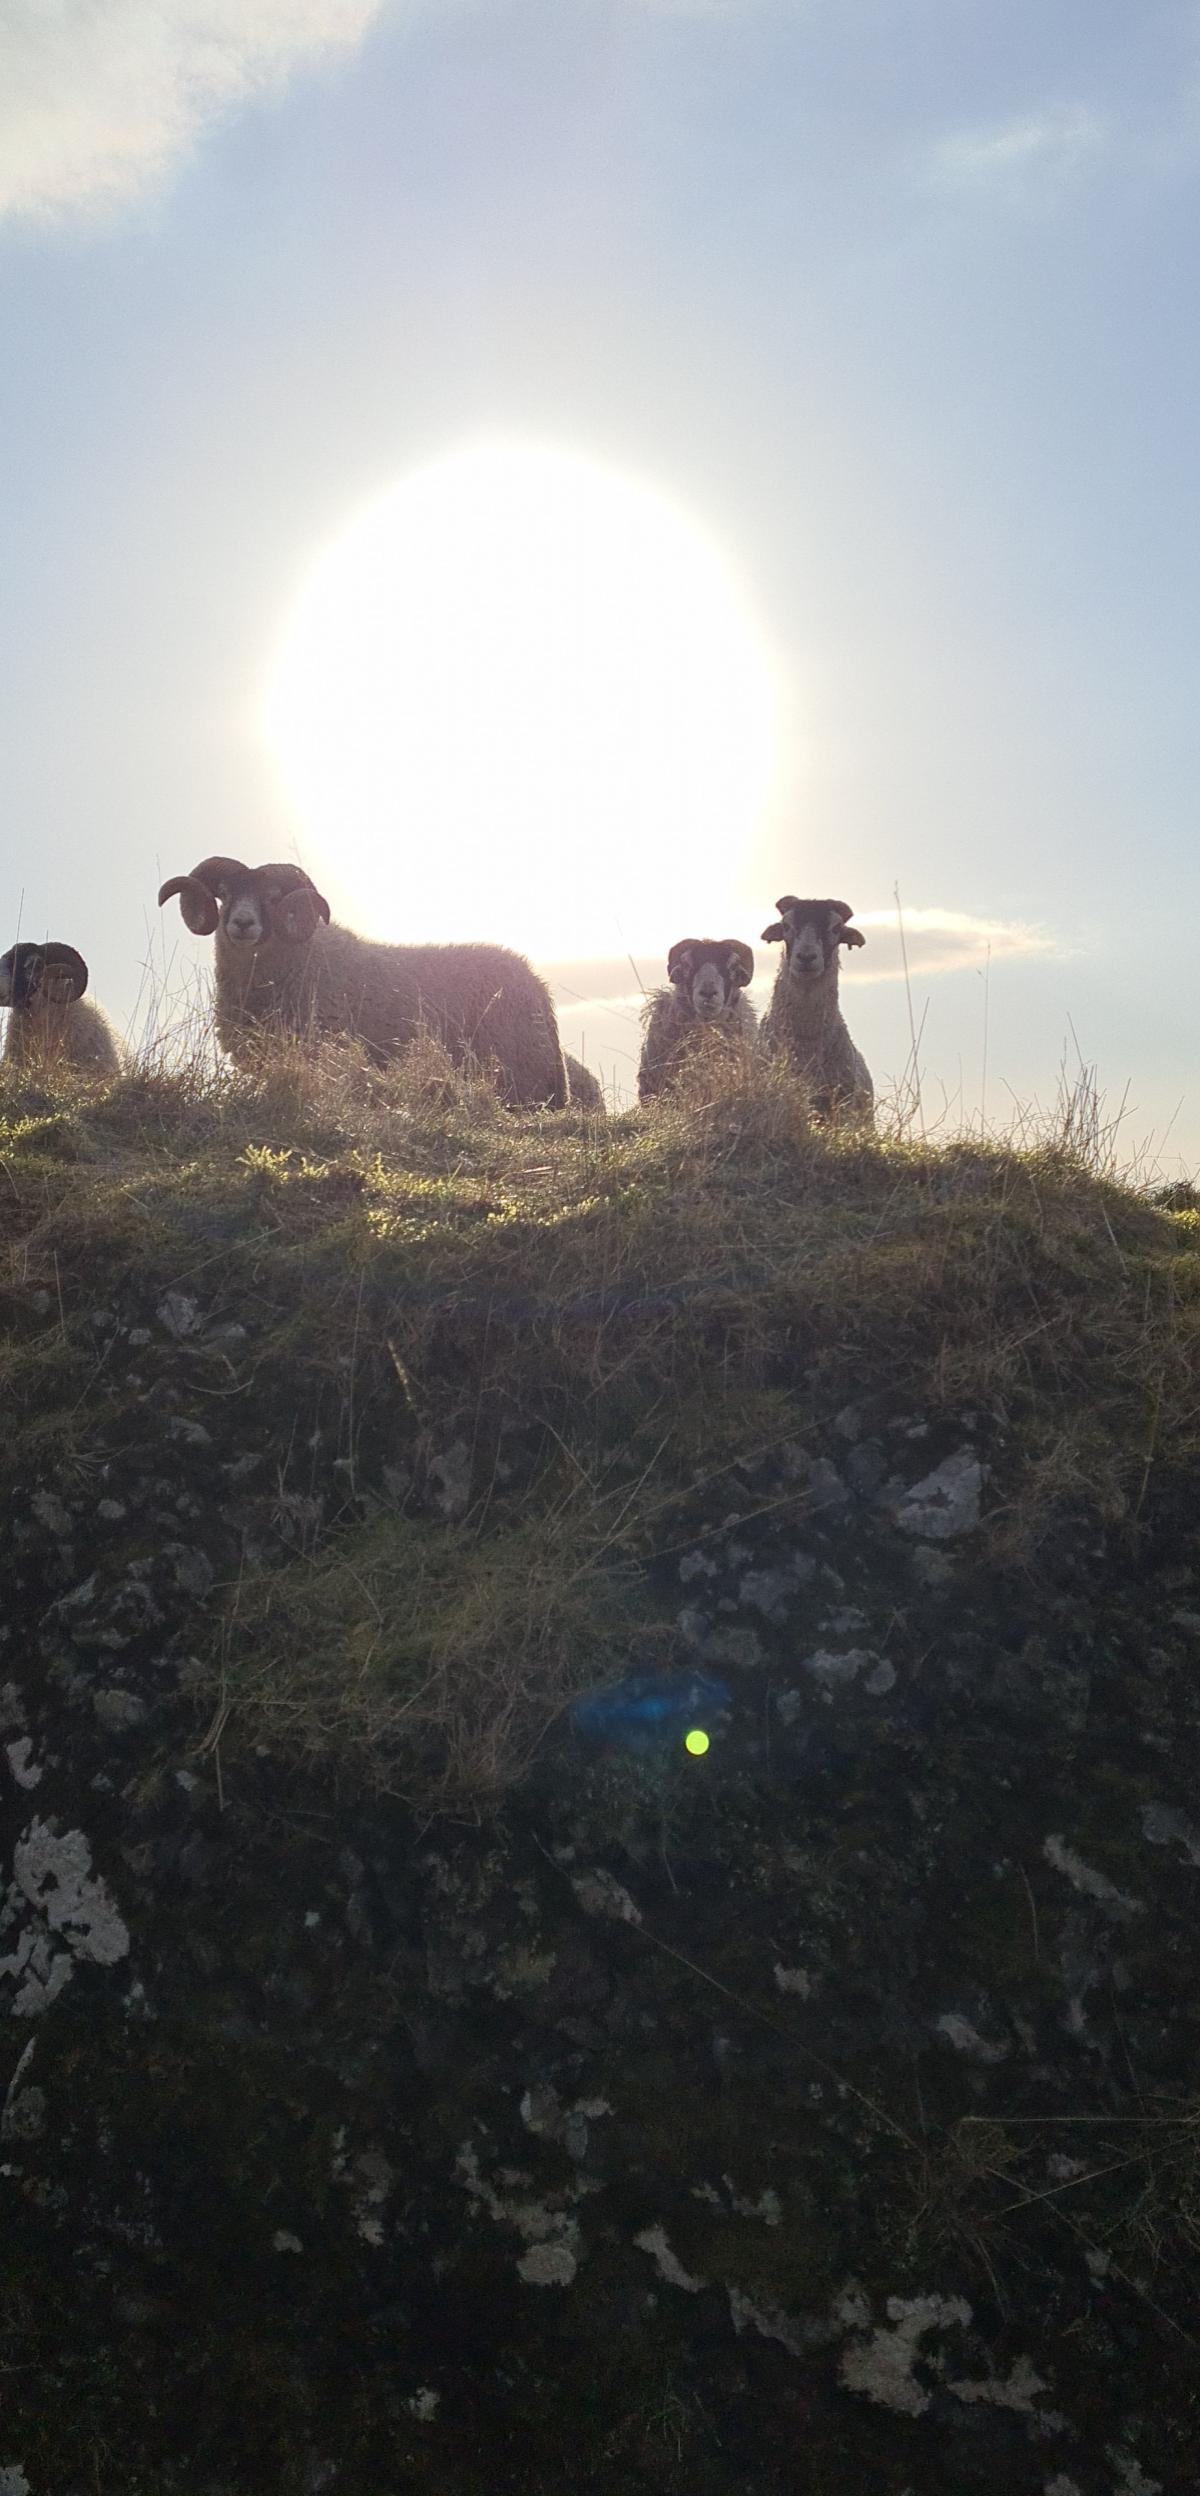 Heather - Lads happy to see the sun out this morning. Or just being noisy